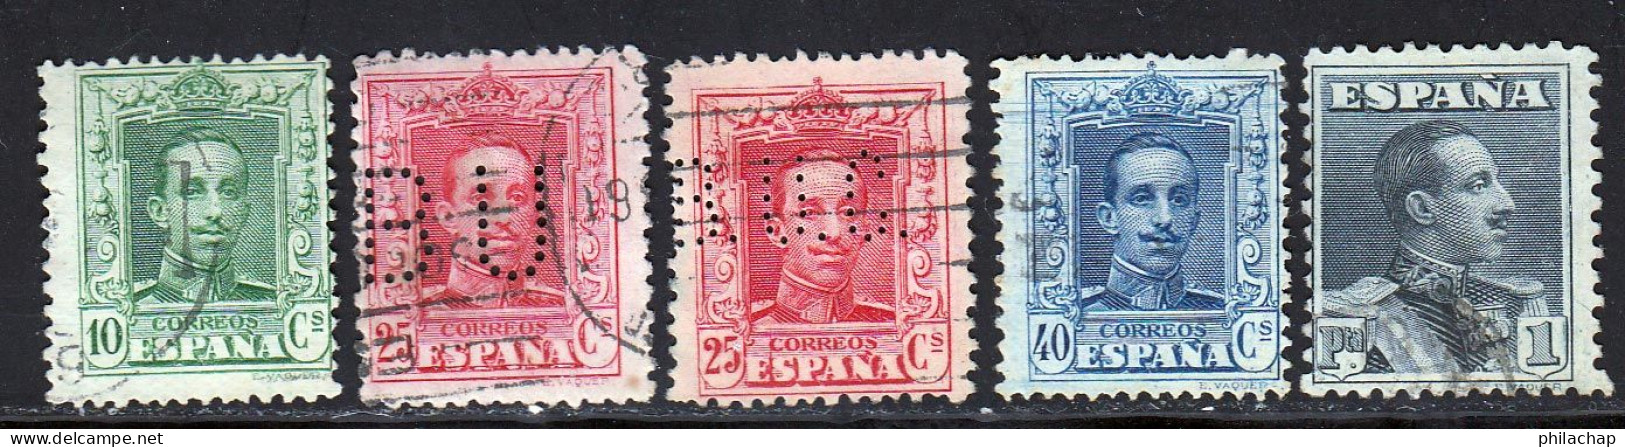 Espagne 1922 Yvert 276 - 279 - 279A - 282 - 284 (o) B Oblitere(s) - Used Stamps